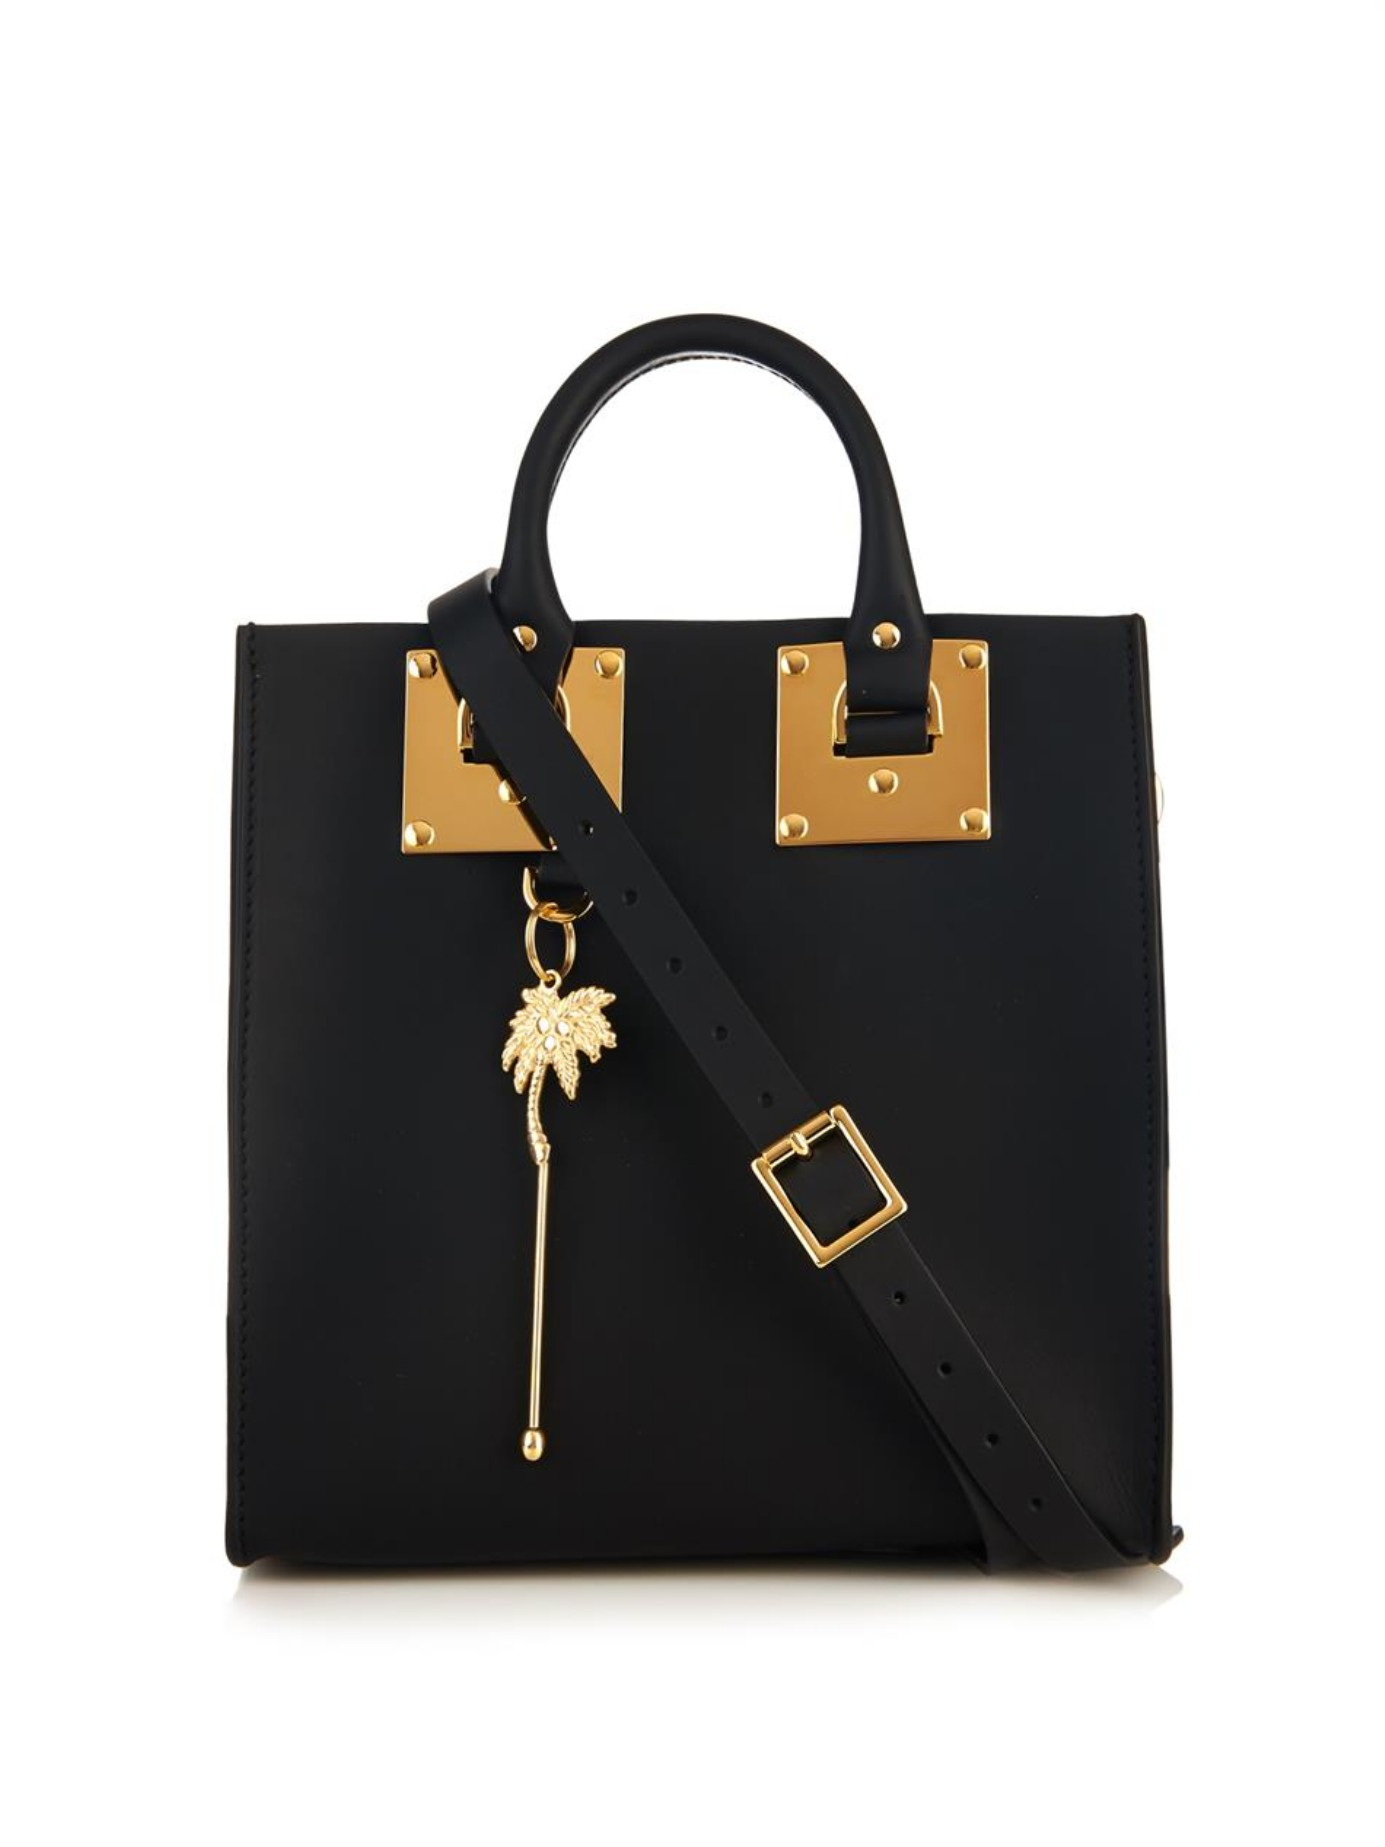 Sophie Hulme Square Structured Leather Tote in Black | Lyst Canada